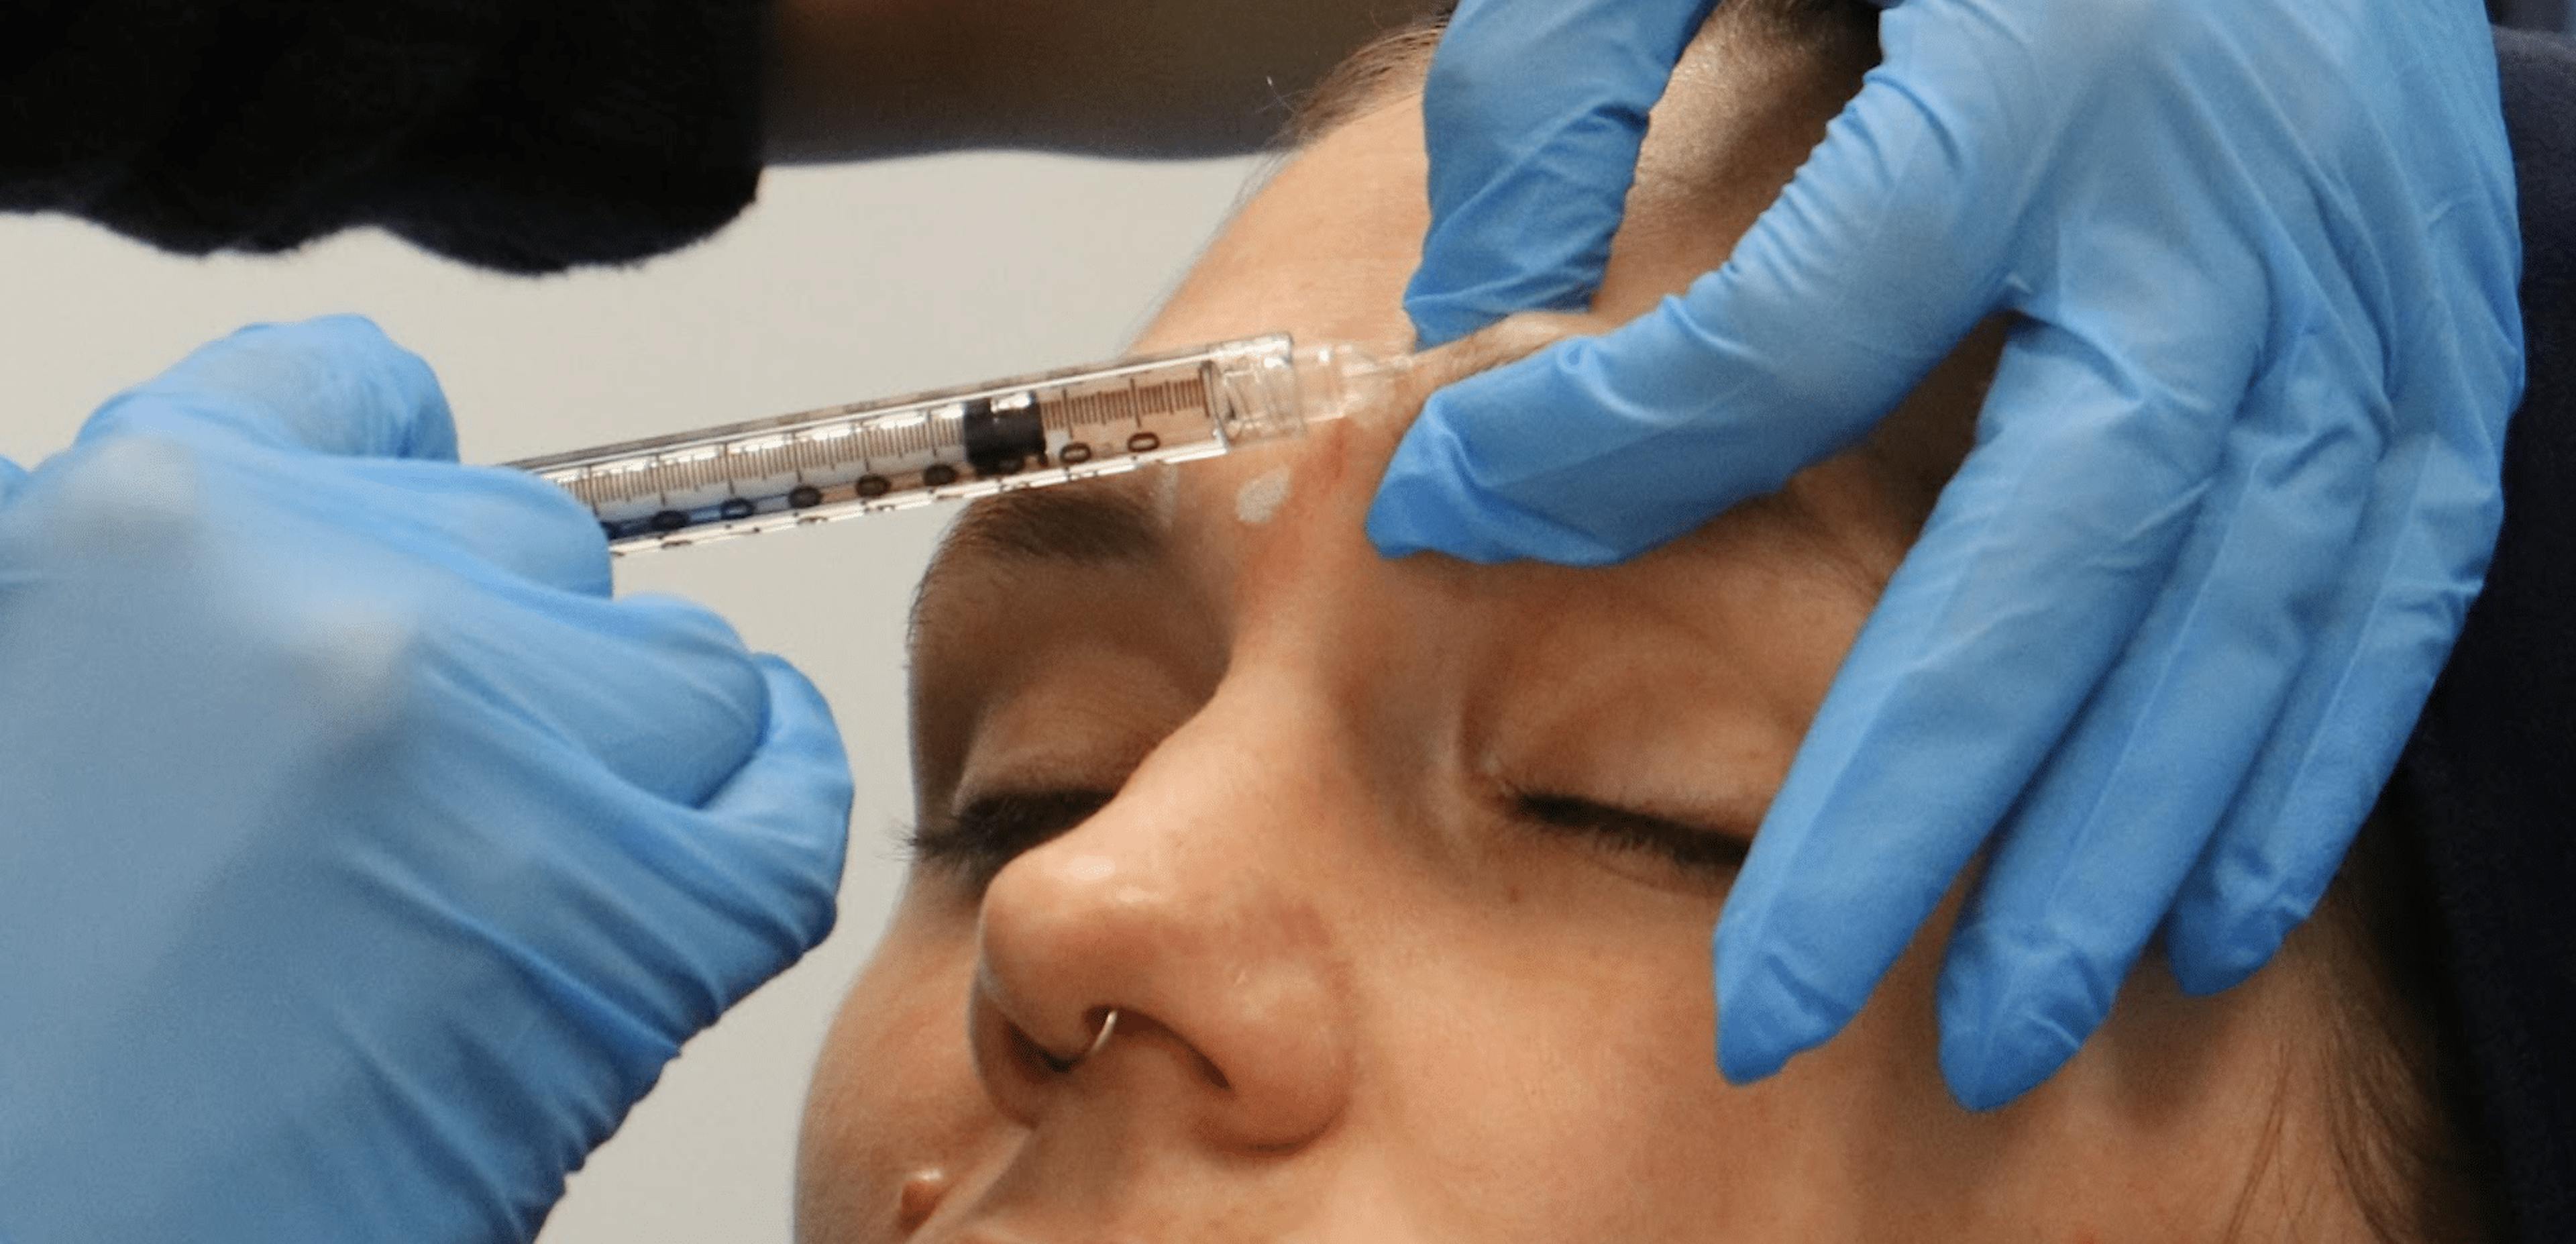 Harley Academy injectables training course botox toxin frown lines